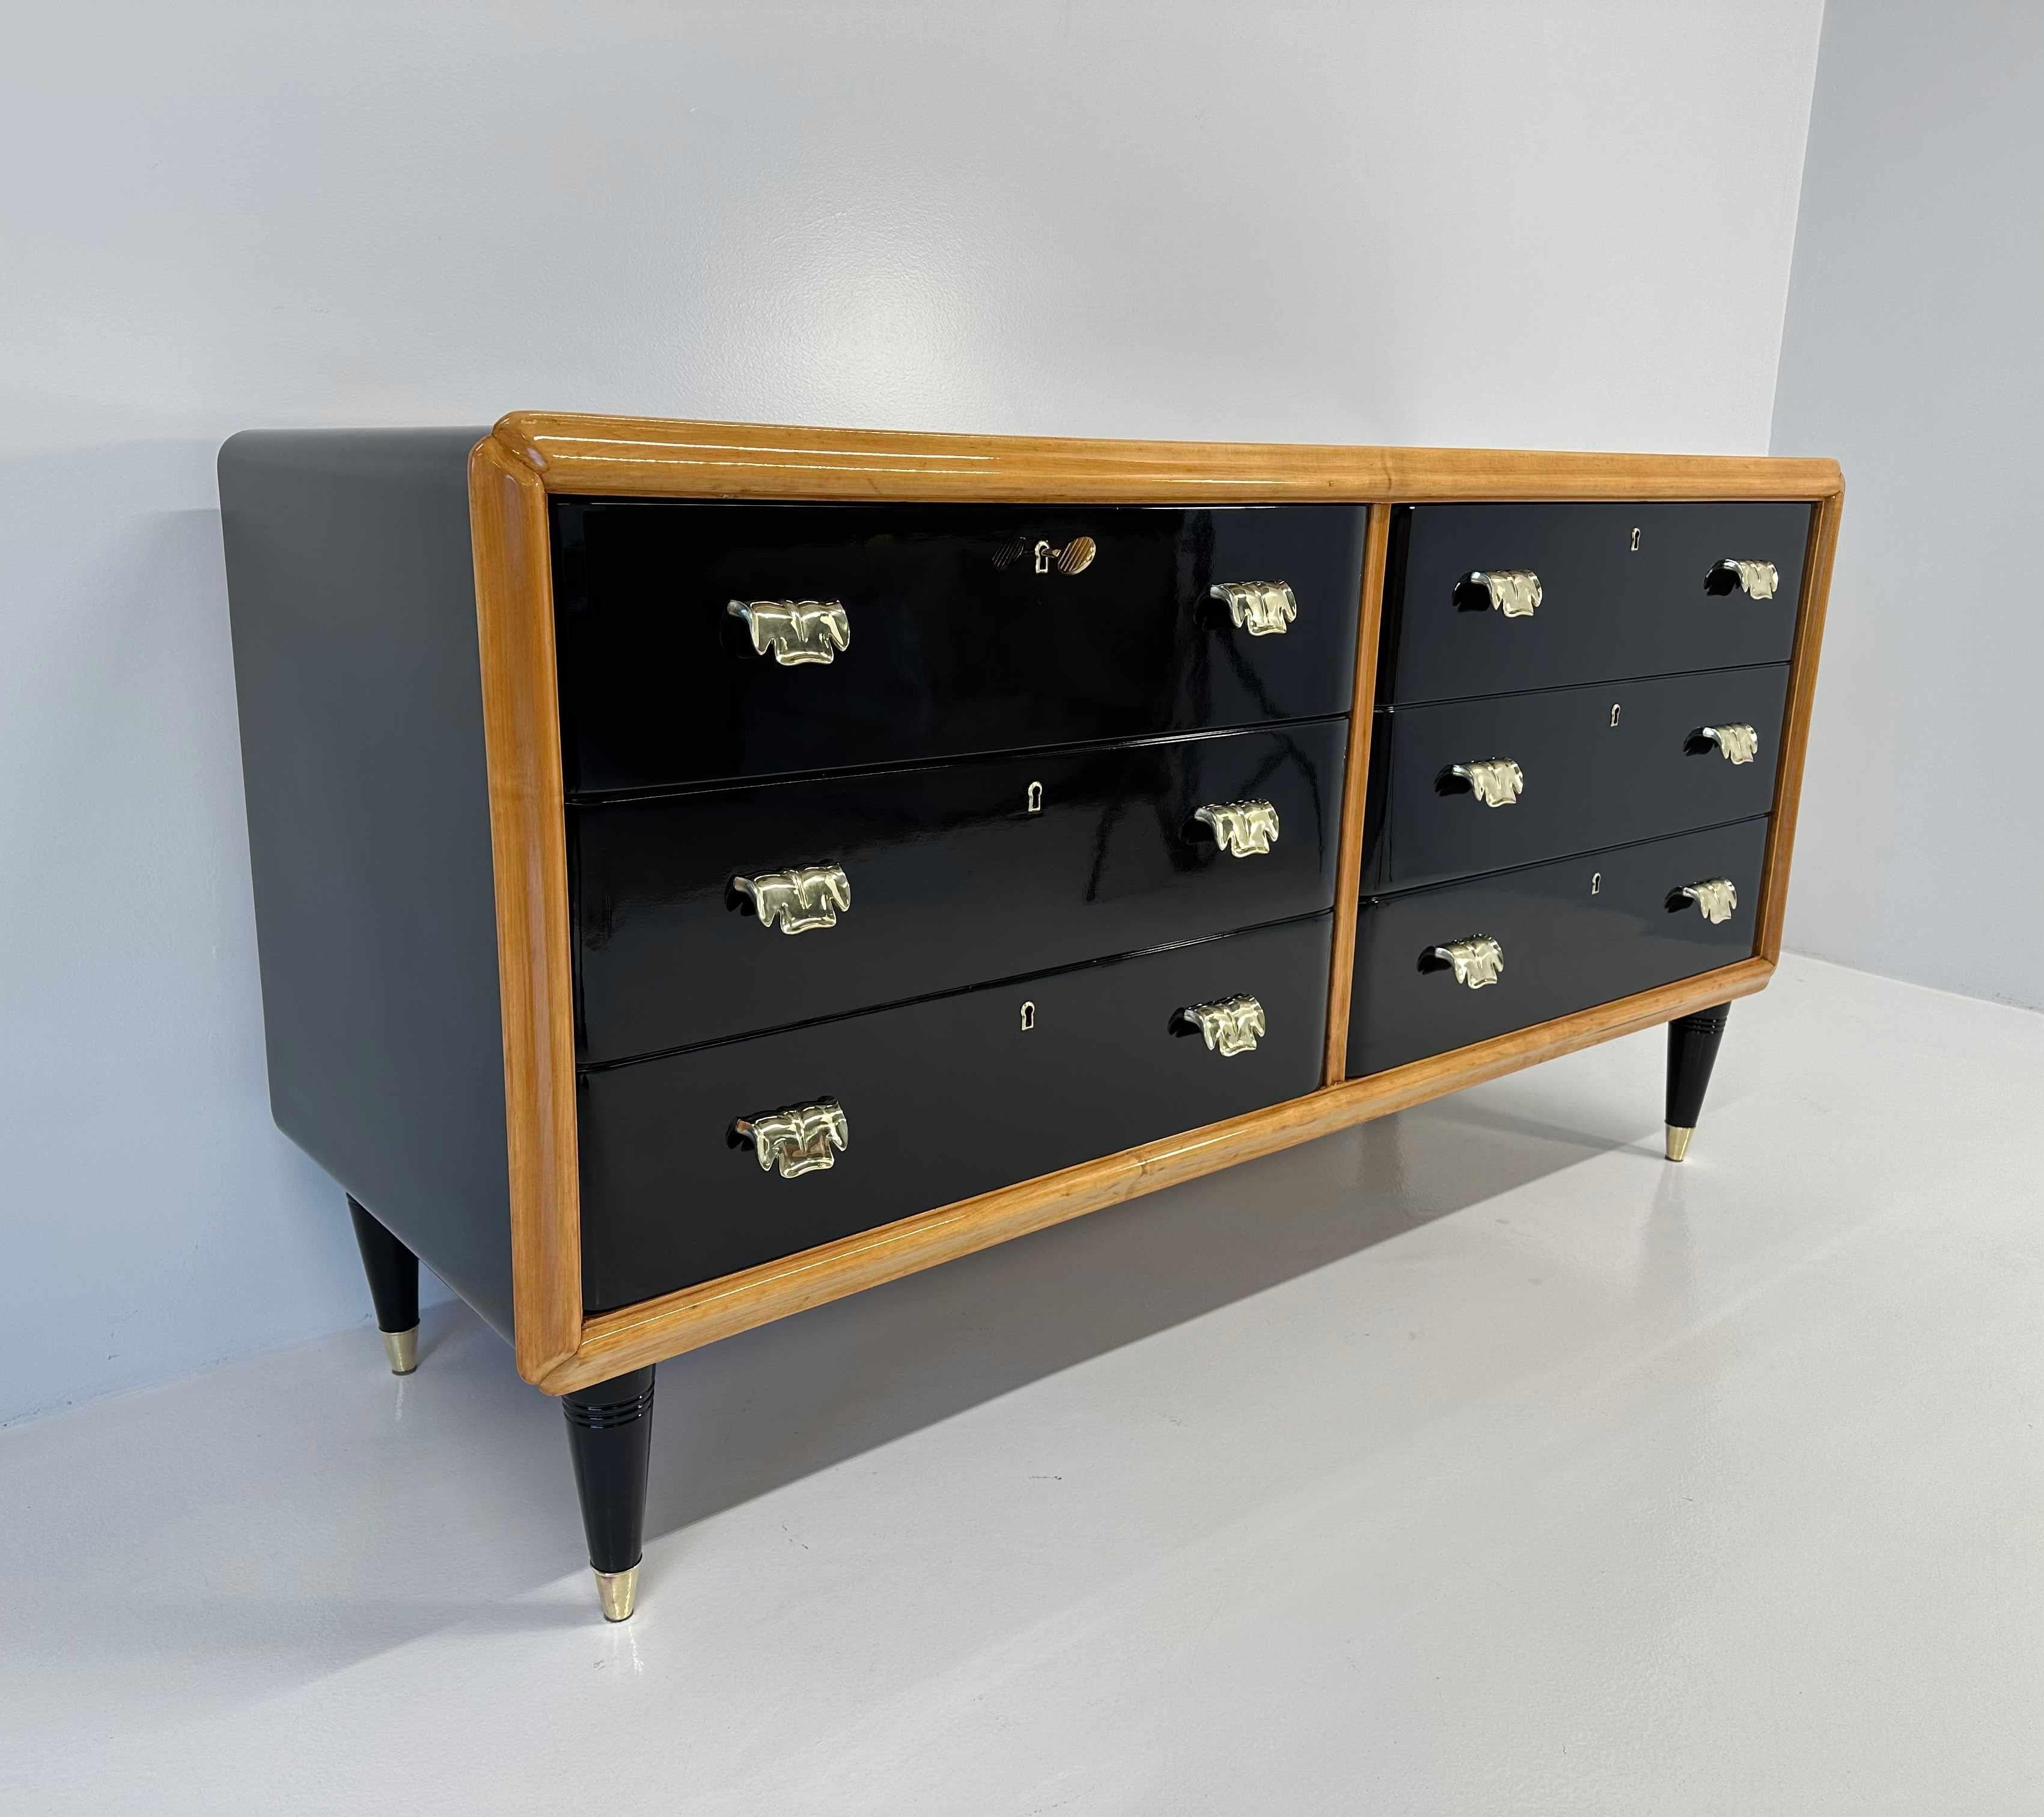 Italian Art Deco Maple, Brass and Black Lacquered Dresser, 1940s For Sale 1